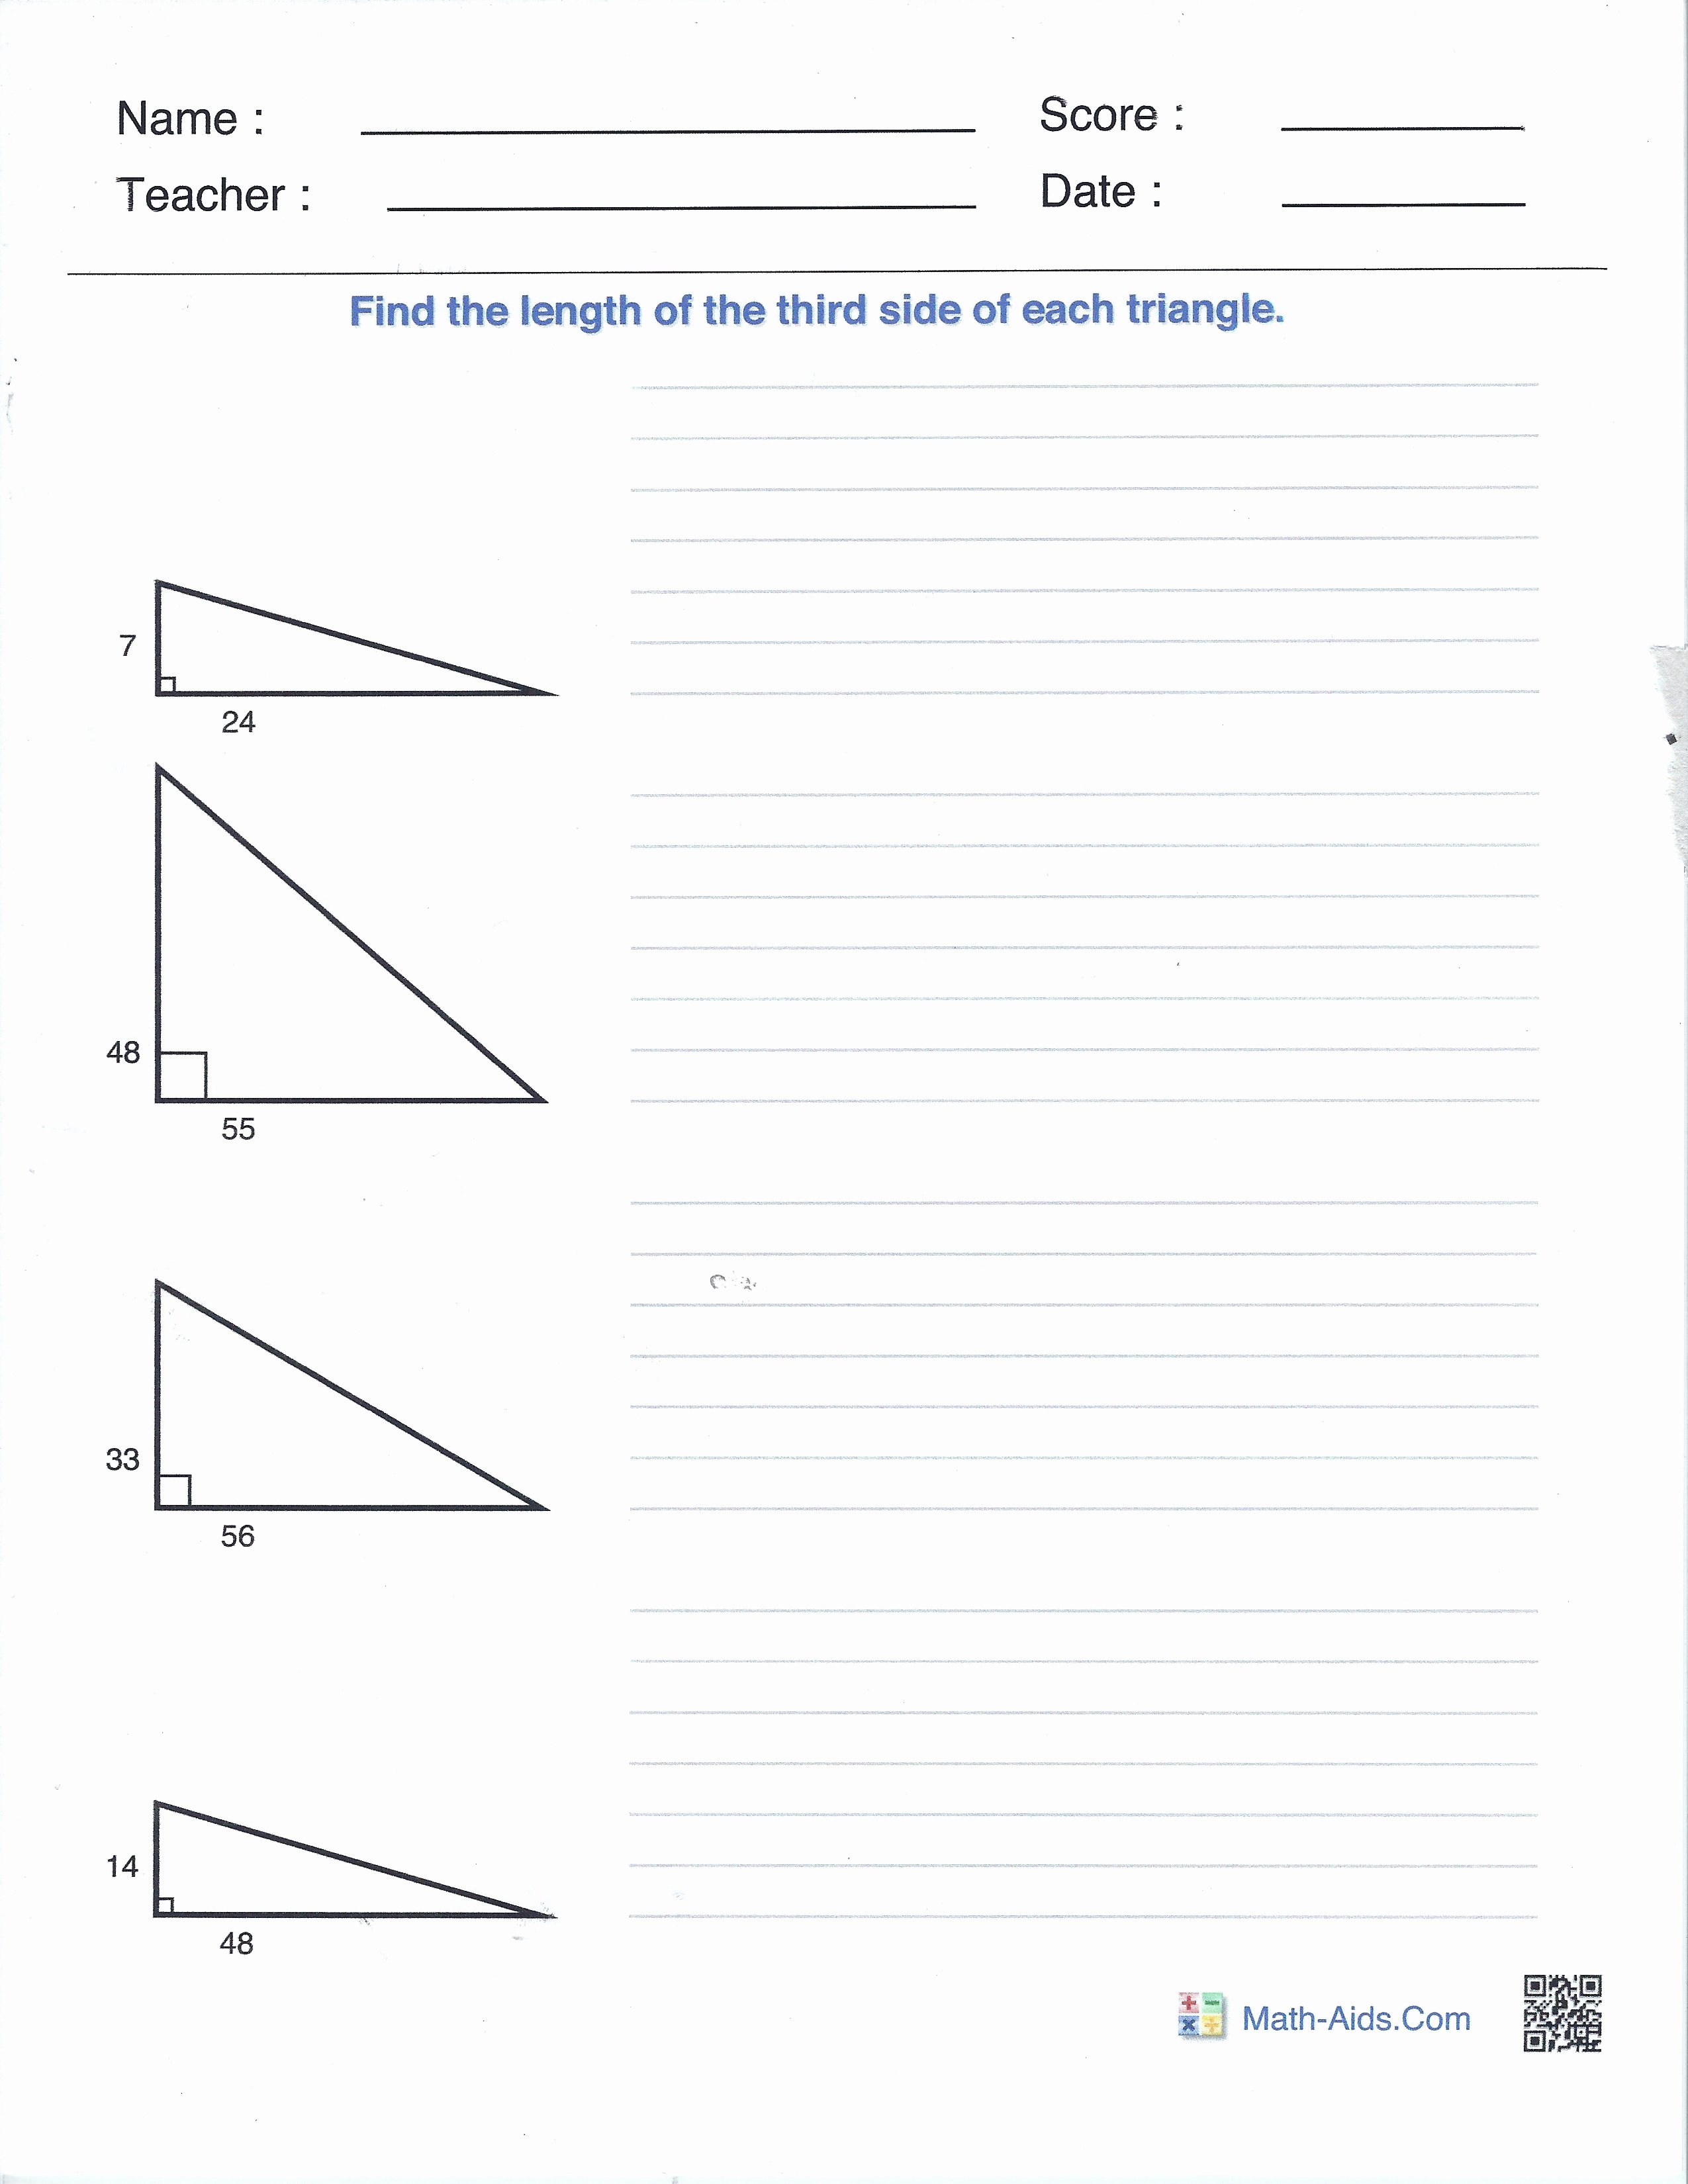 Pythagoras theorem Worksheet Pdf Lovely Right Angles and the Pythagorean theorem